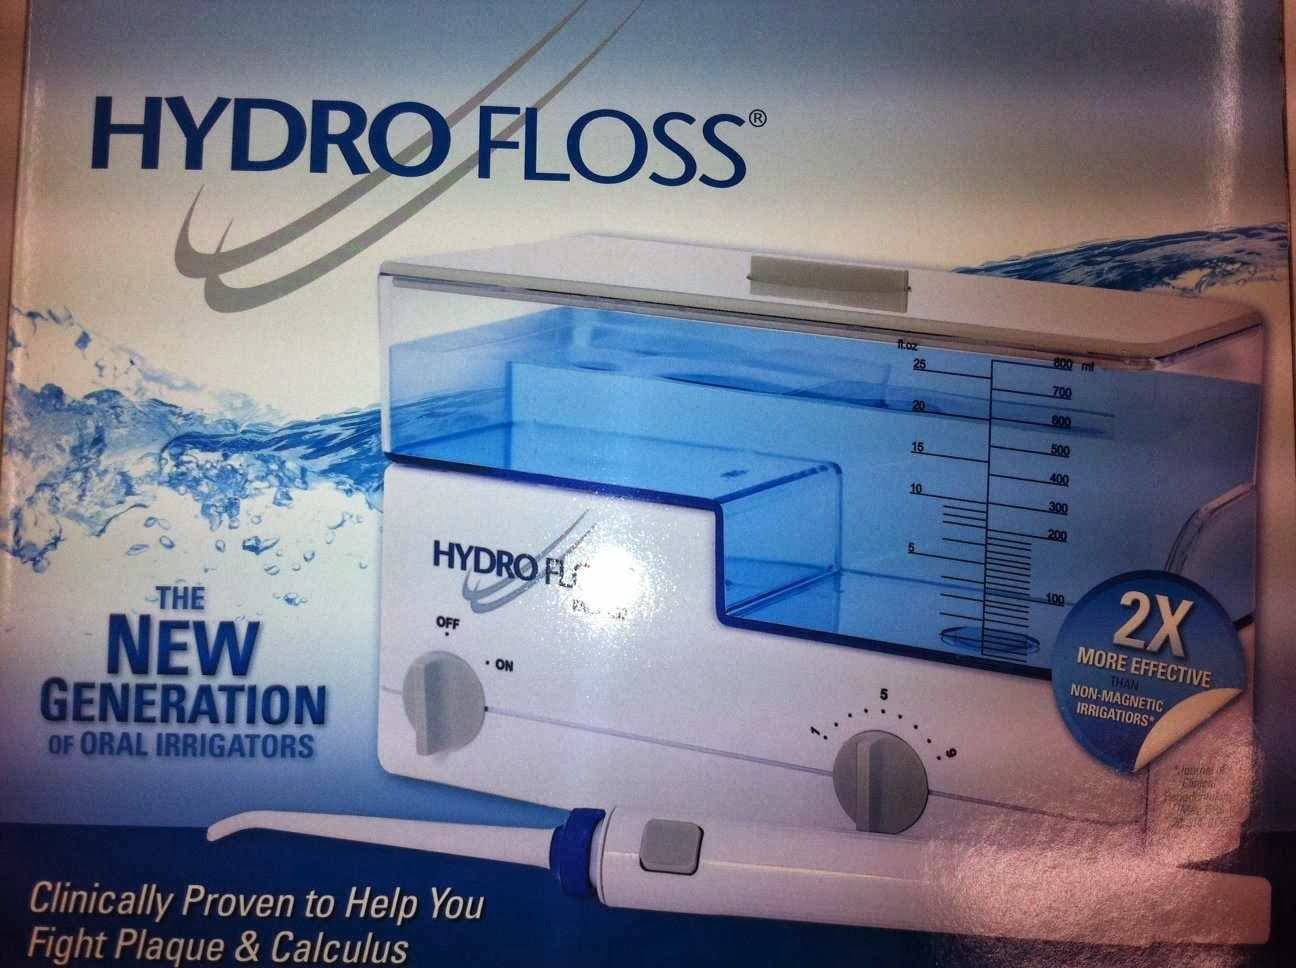 Hydrofloss Accessories - Pimp Out Your Hydro Floss.